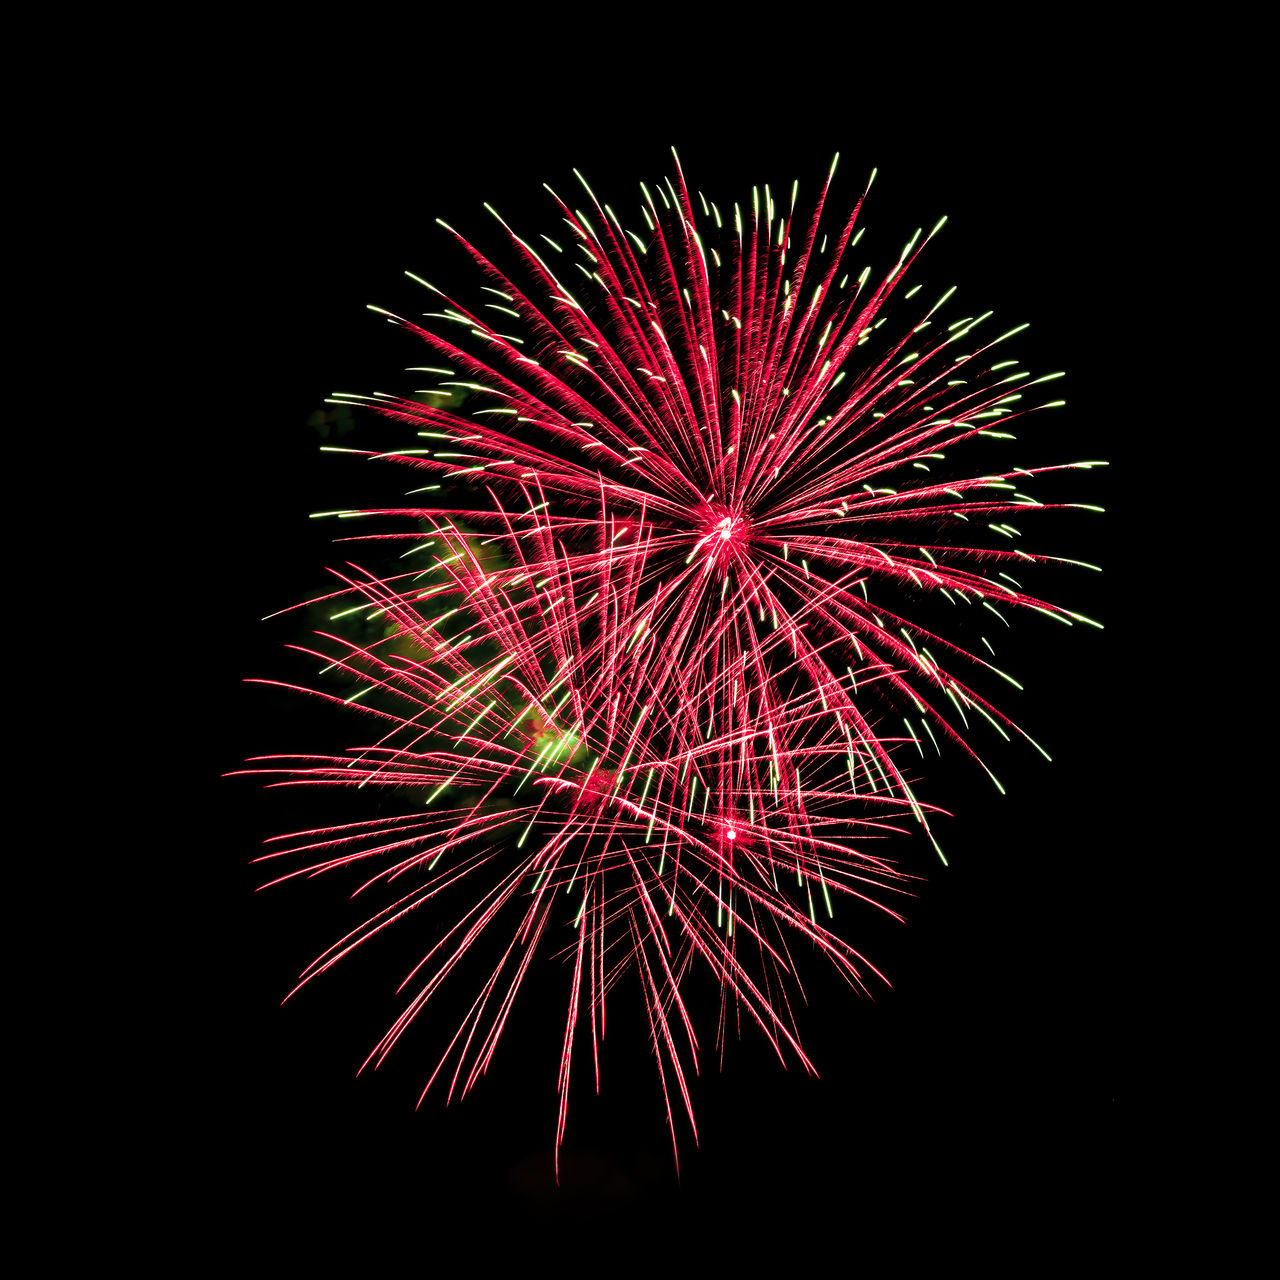 fireworks, celebration, firework display, exploding, motion, event, night, illuminated, arts culture and entertainment, glowing, no people, firework - man made object, recreation, multi colored, sky, red, nature, long exposure, low angle view, blurred motion, dark, black background, black, copy space, outdoors